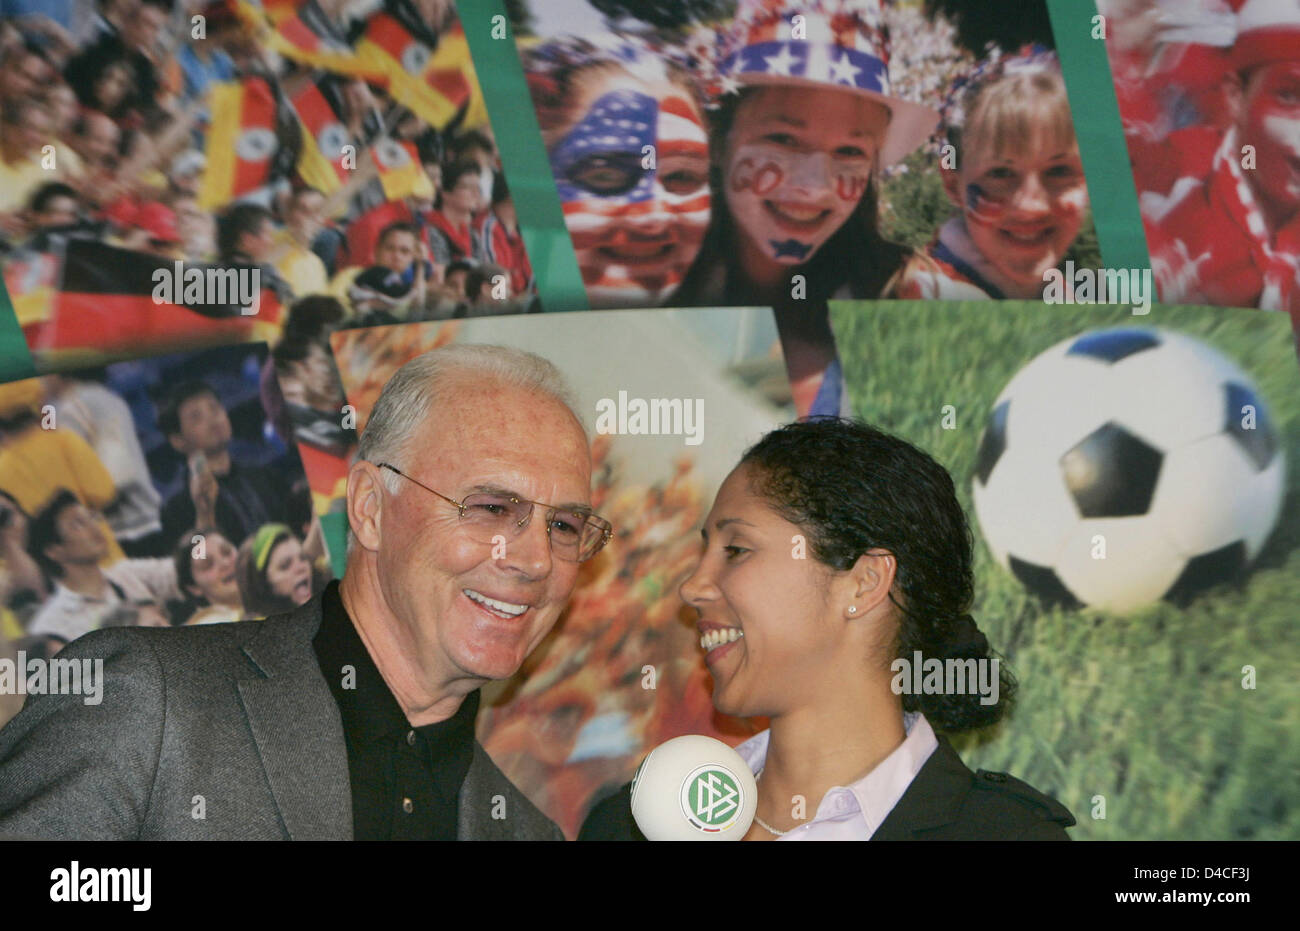 German soccer legend Franz Beckenbauer (L) symbolically shares an intimate moment with Steffi Jones (R), President of the 2011 FIFA Women's World Cup organisation committee (OC) and former international midfielder for Germany, during a press conference of the German Soccer Federation (DFB) In Frankfurt Main, Germany, 25 January 2008. The OC officially picked up its work with the in Stock Photo